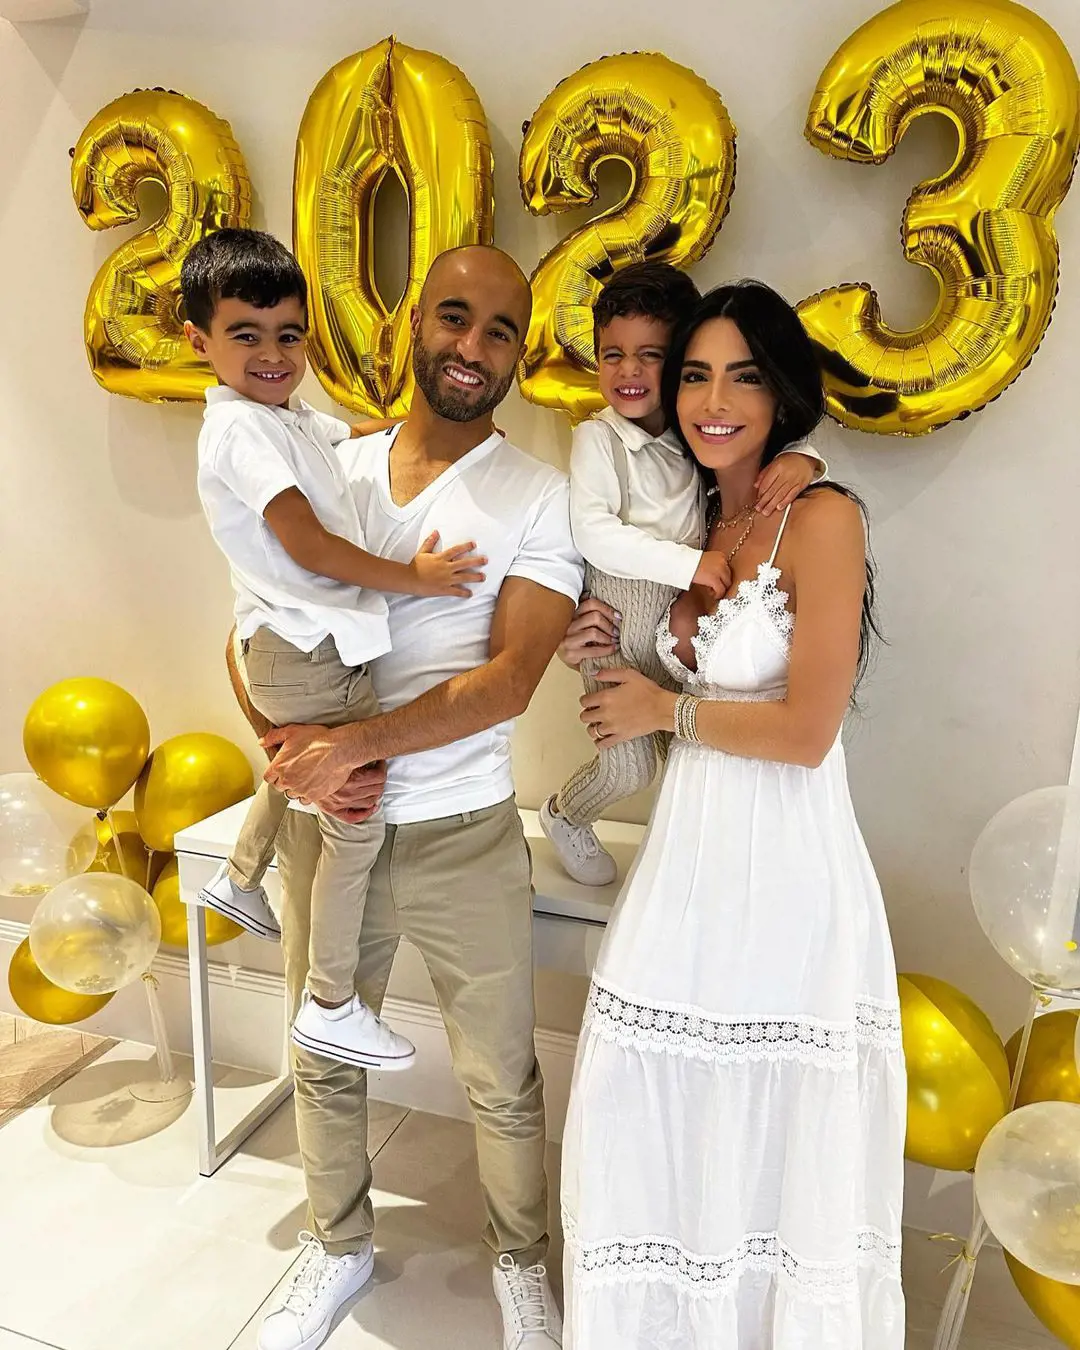 Lucas Moura celebrating New Year with his wife Larissa Saad and his two sons Miguel and Pedro on January 1st 2023